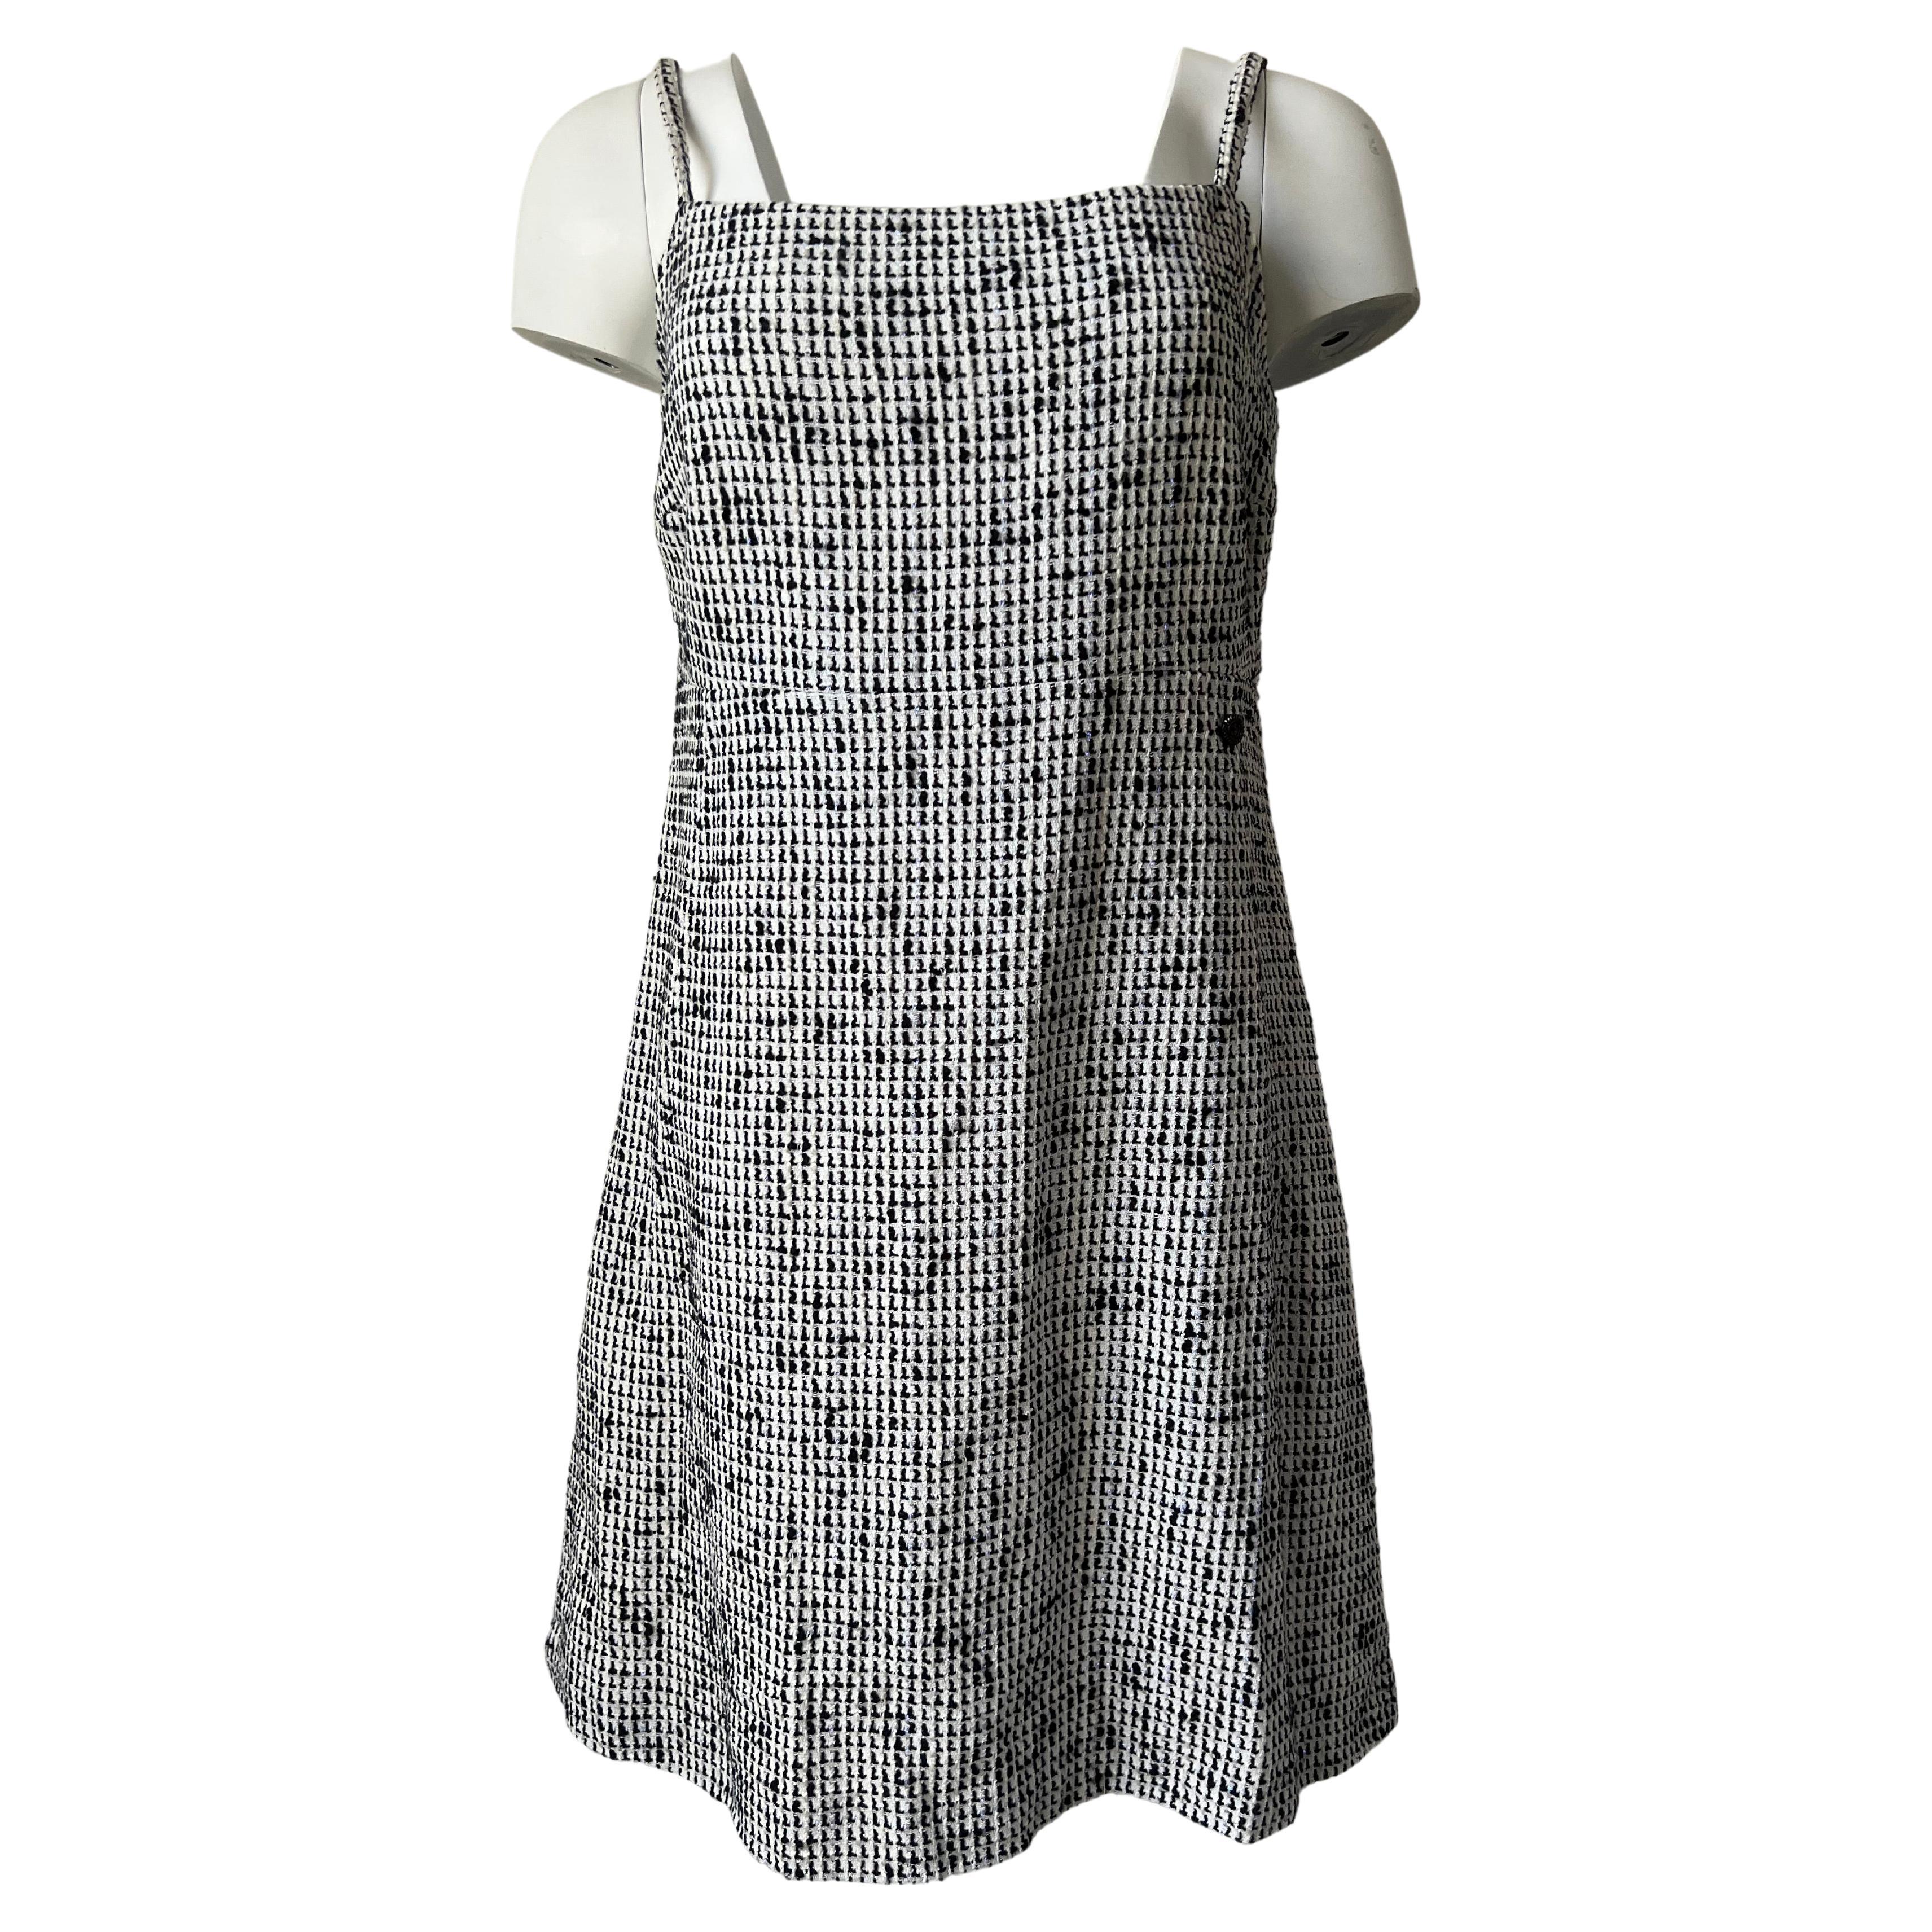 Black and White Tweed Dress Chanel 2010 For Sale